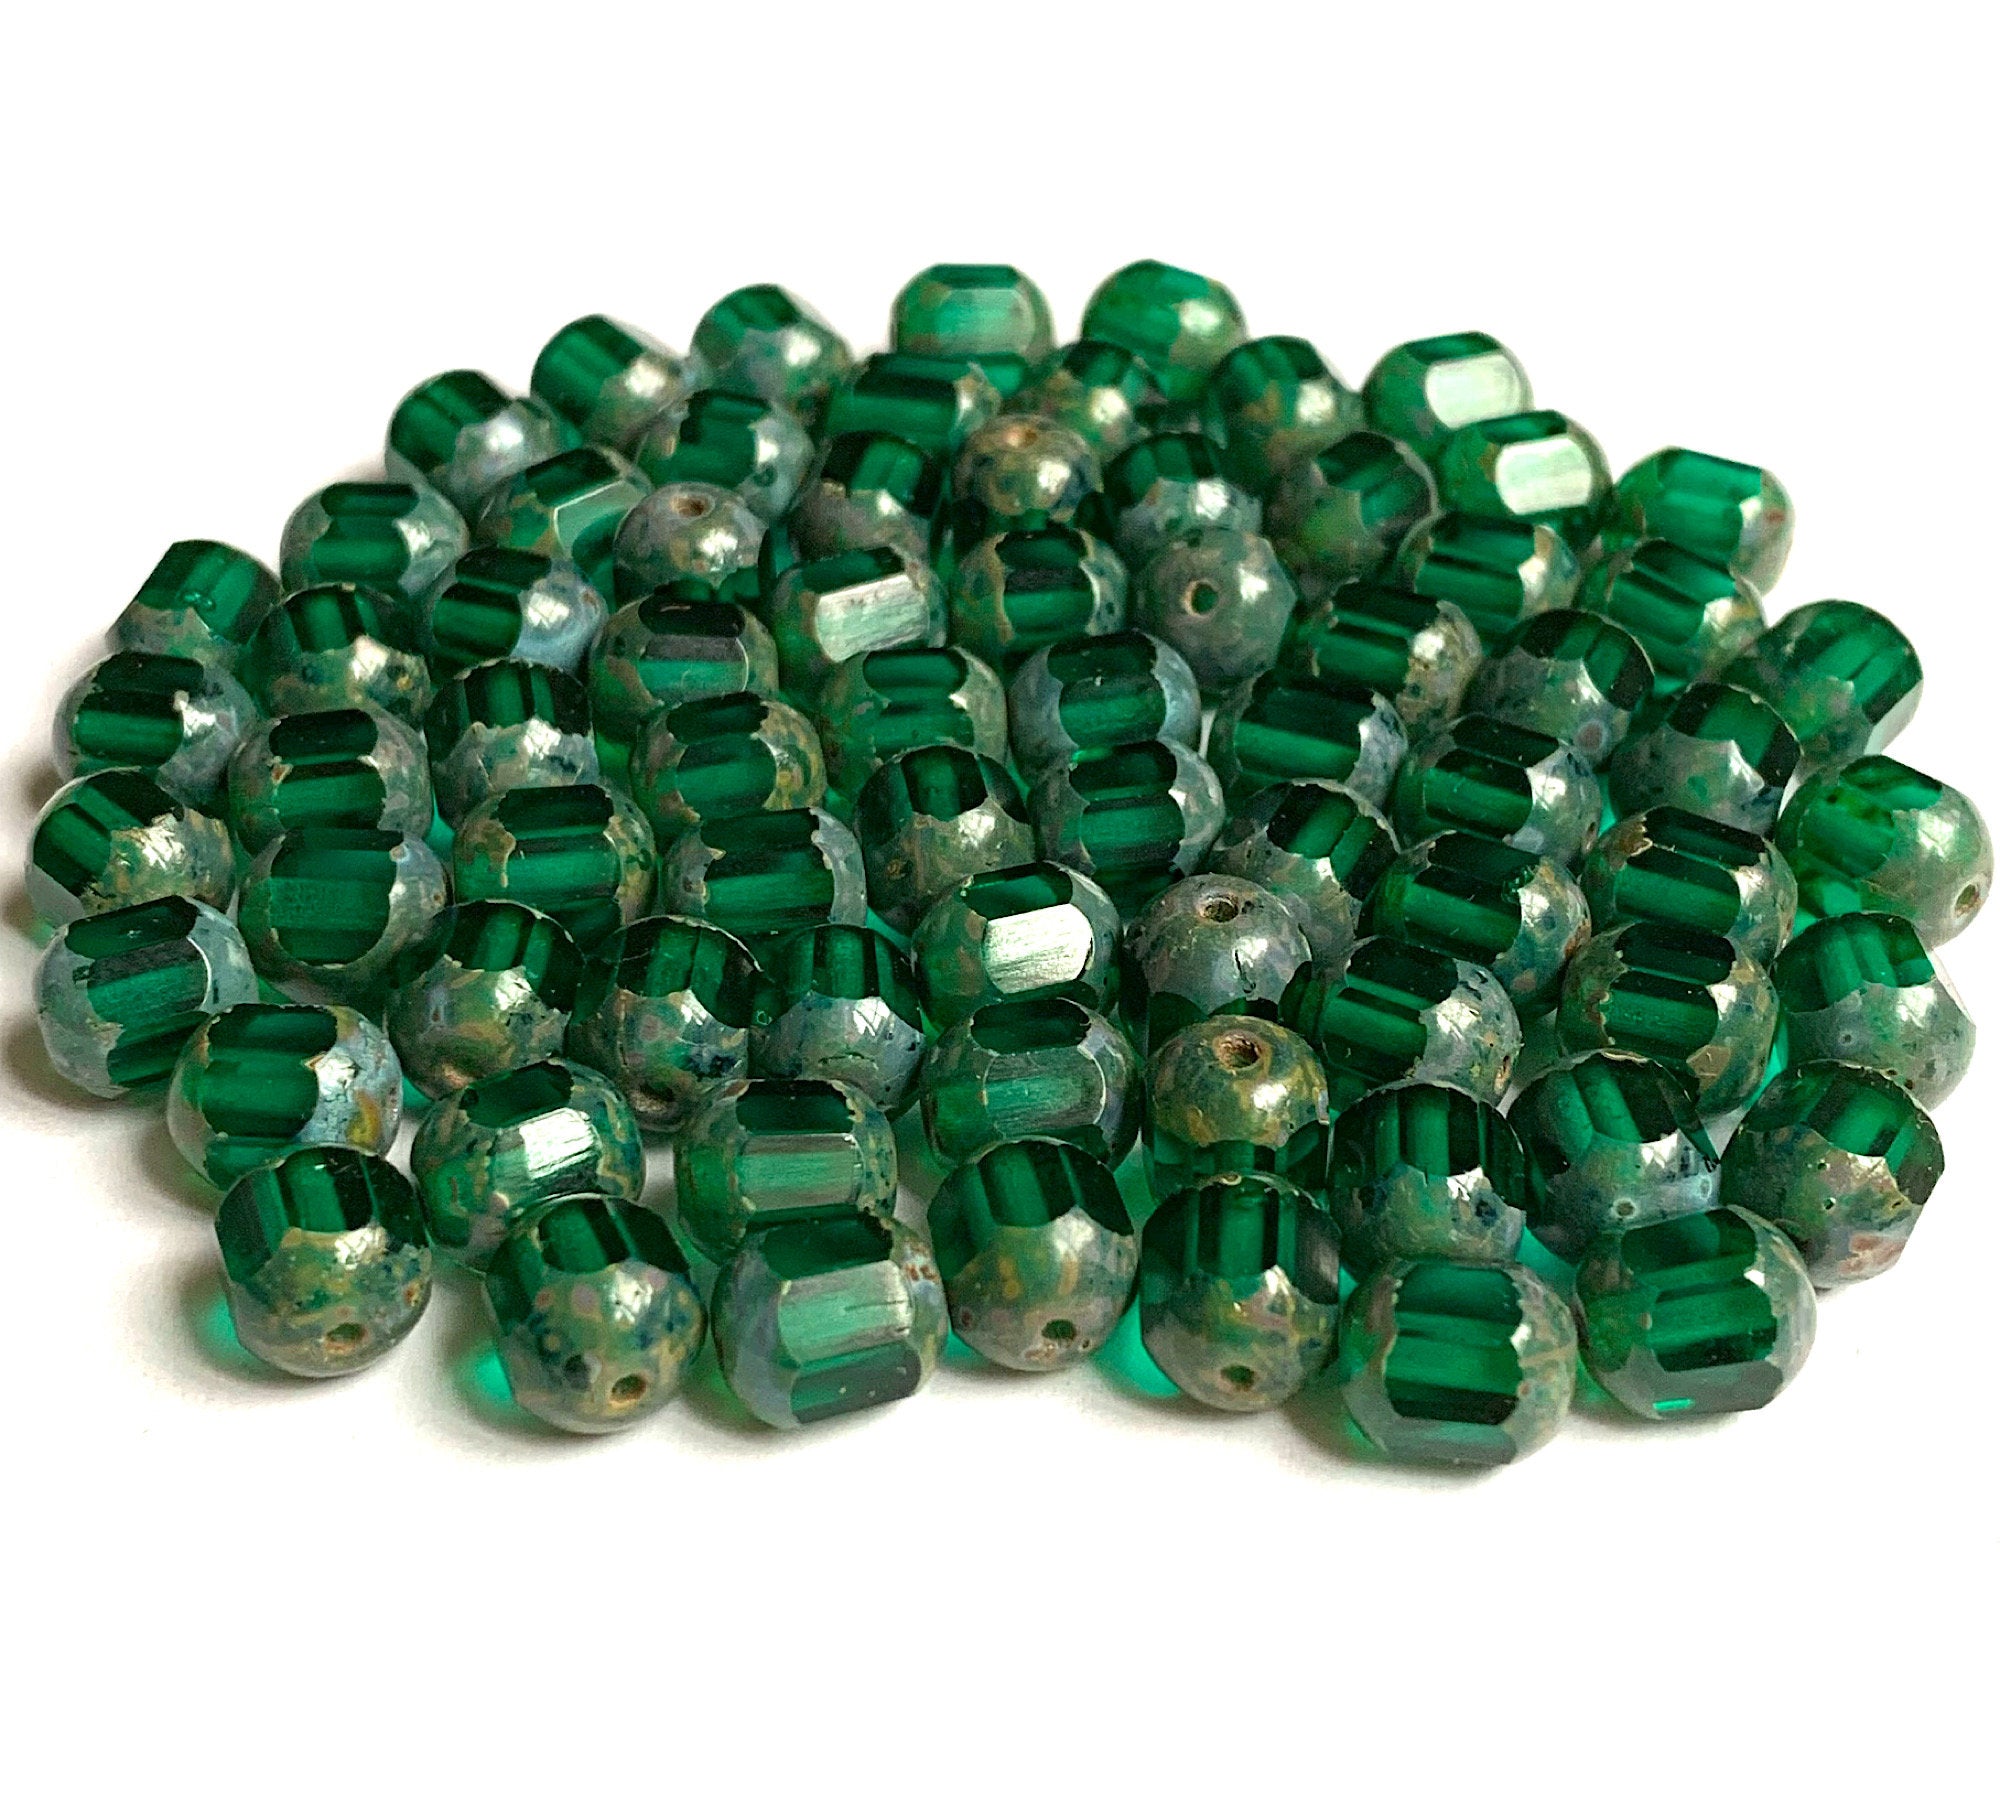 Picasso Czech Glass Beads, 8mm Emerald Green and White Faceted